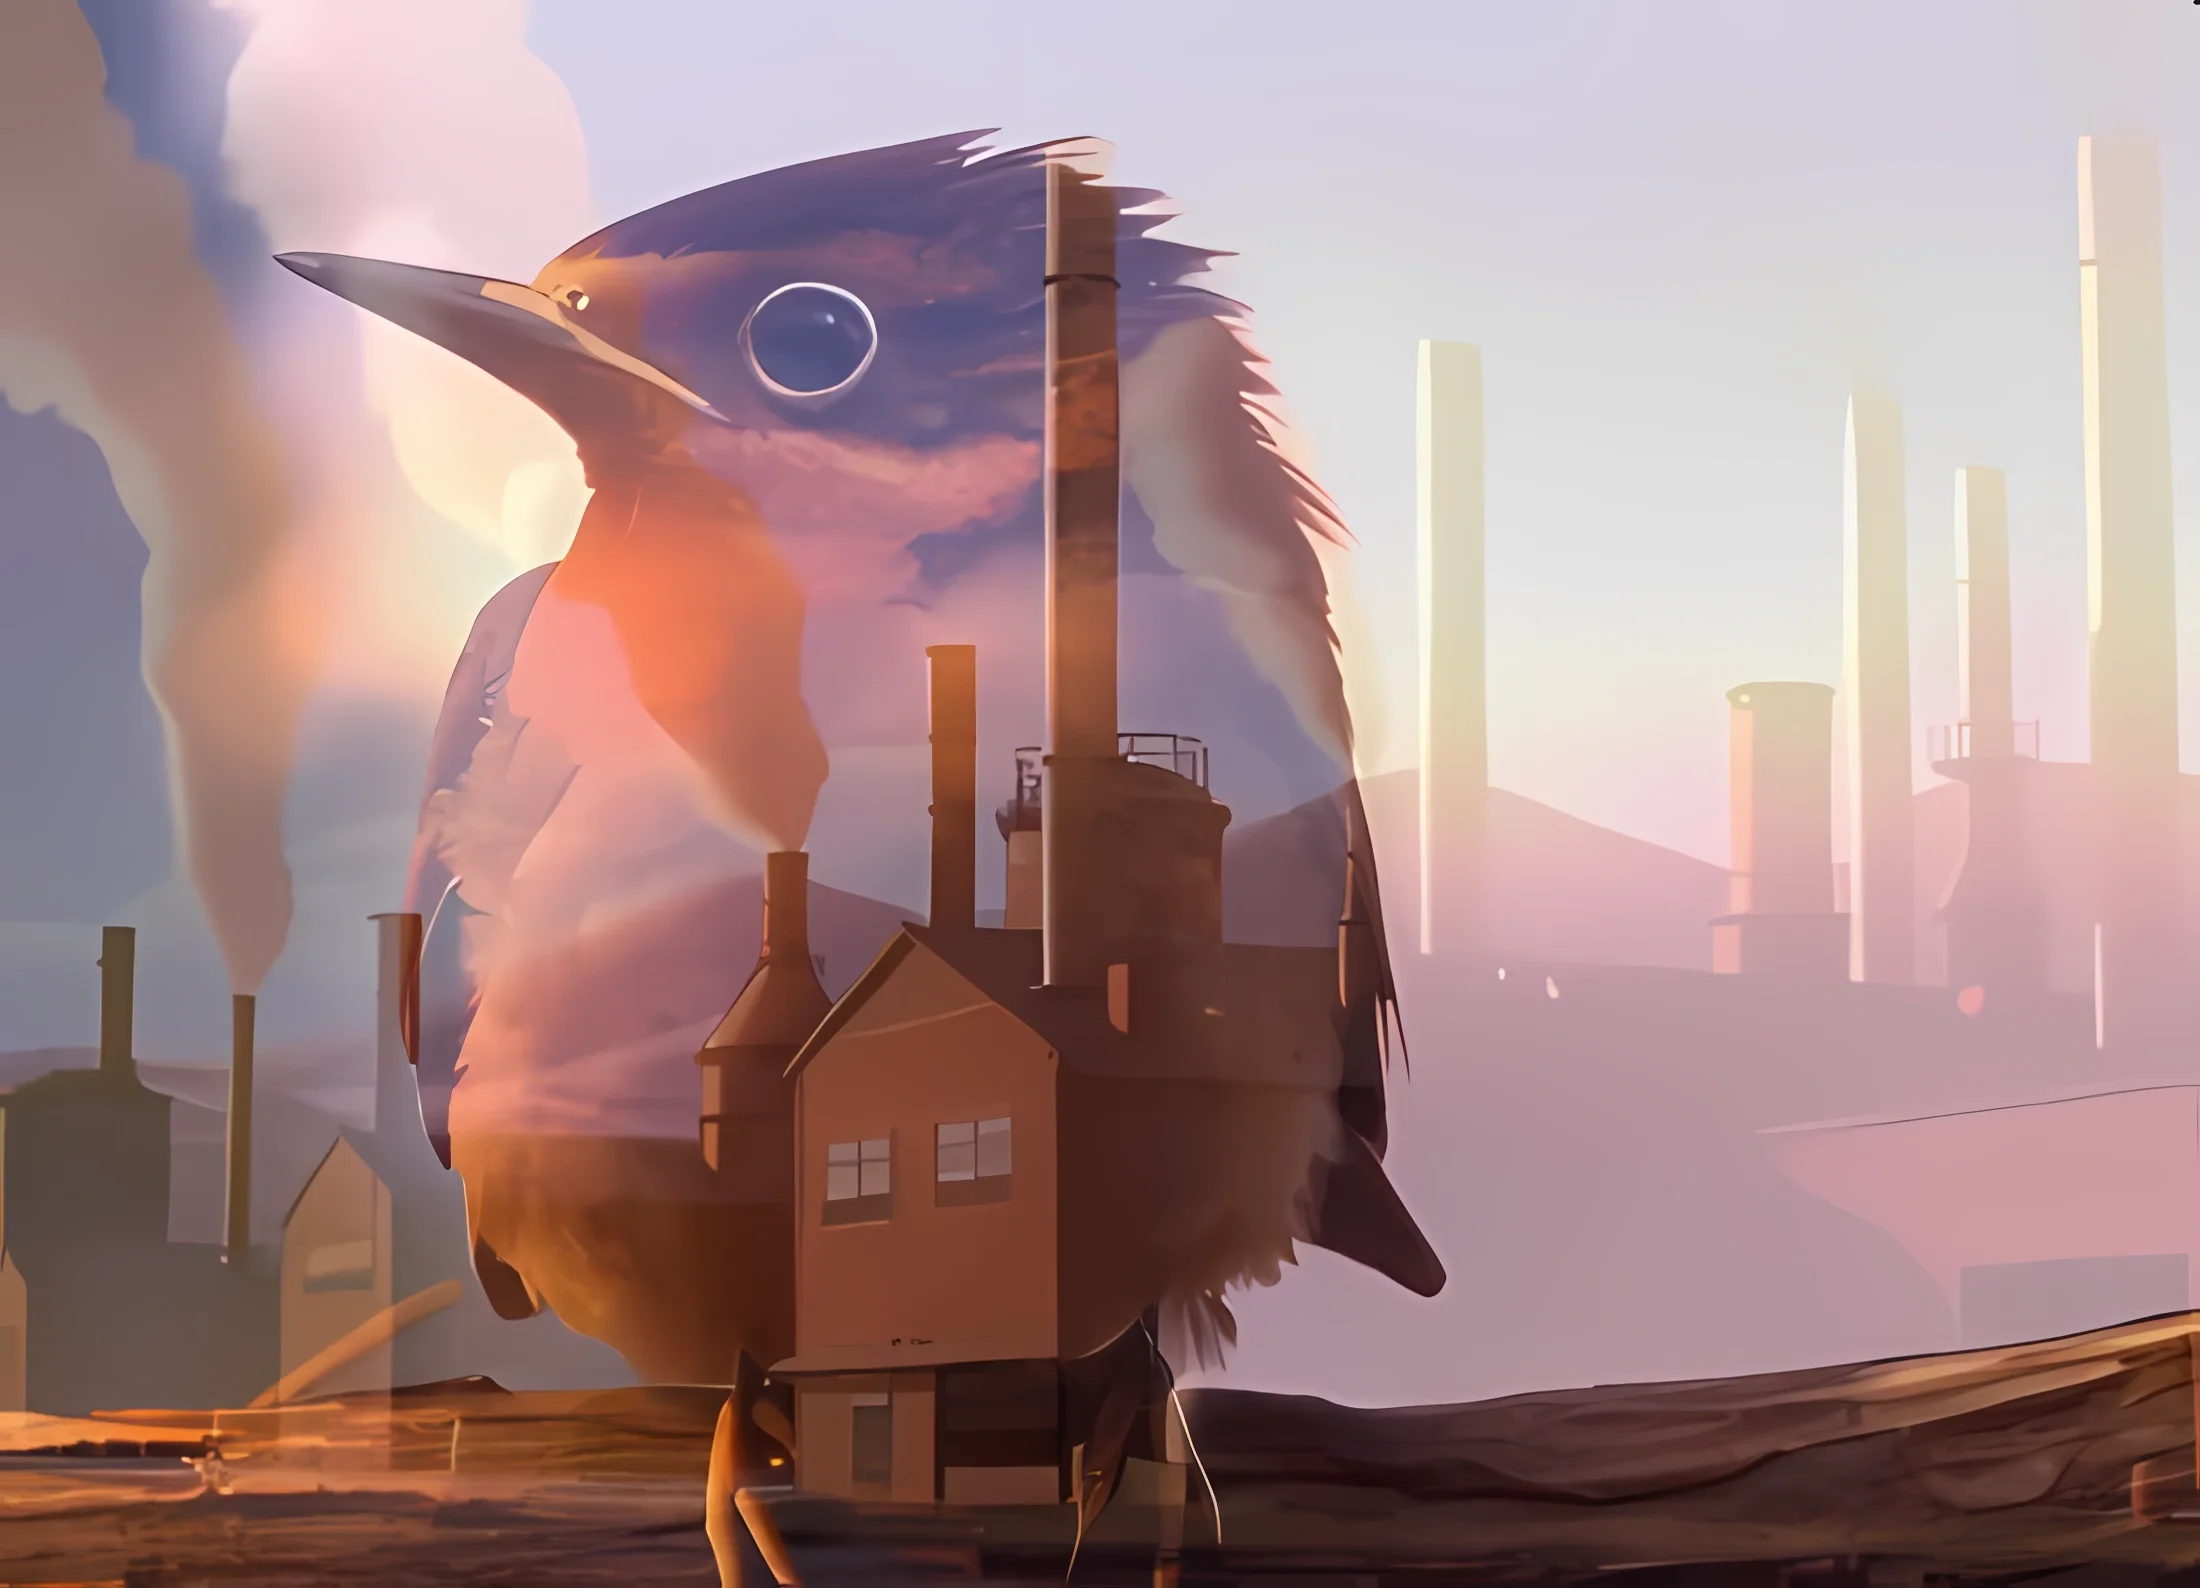 Someone recreated the intro of Twin Peaks in Pixar style with AI tools